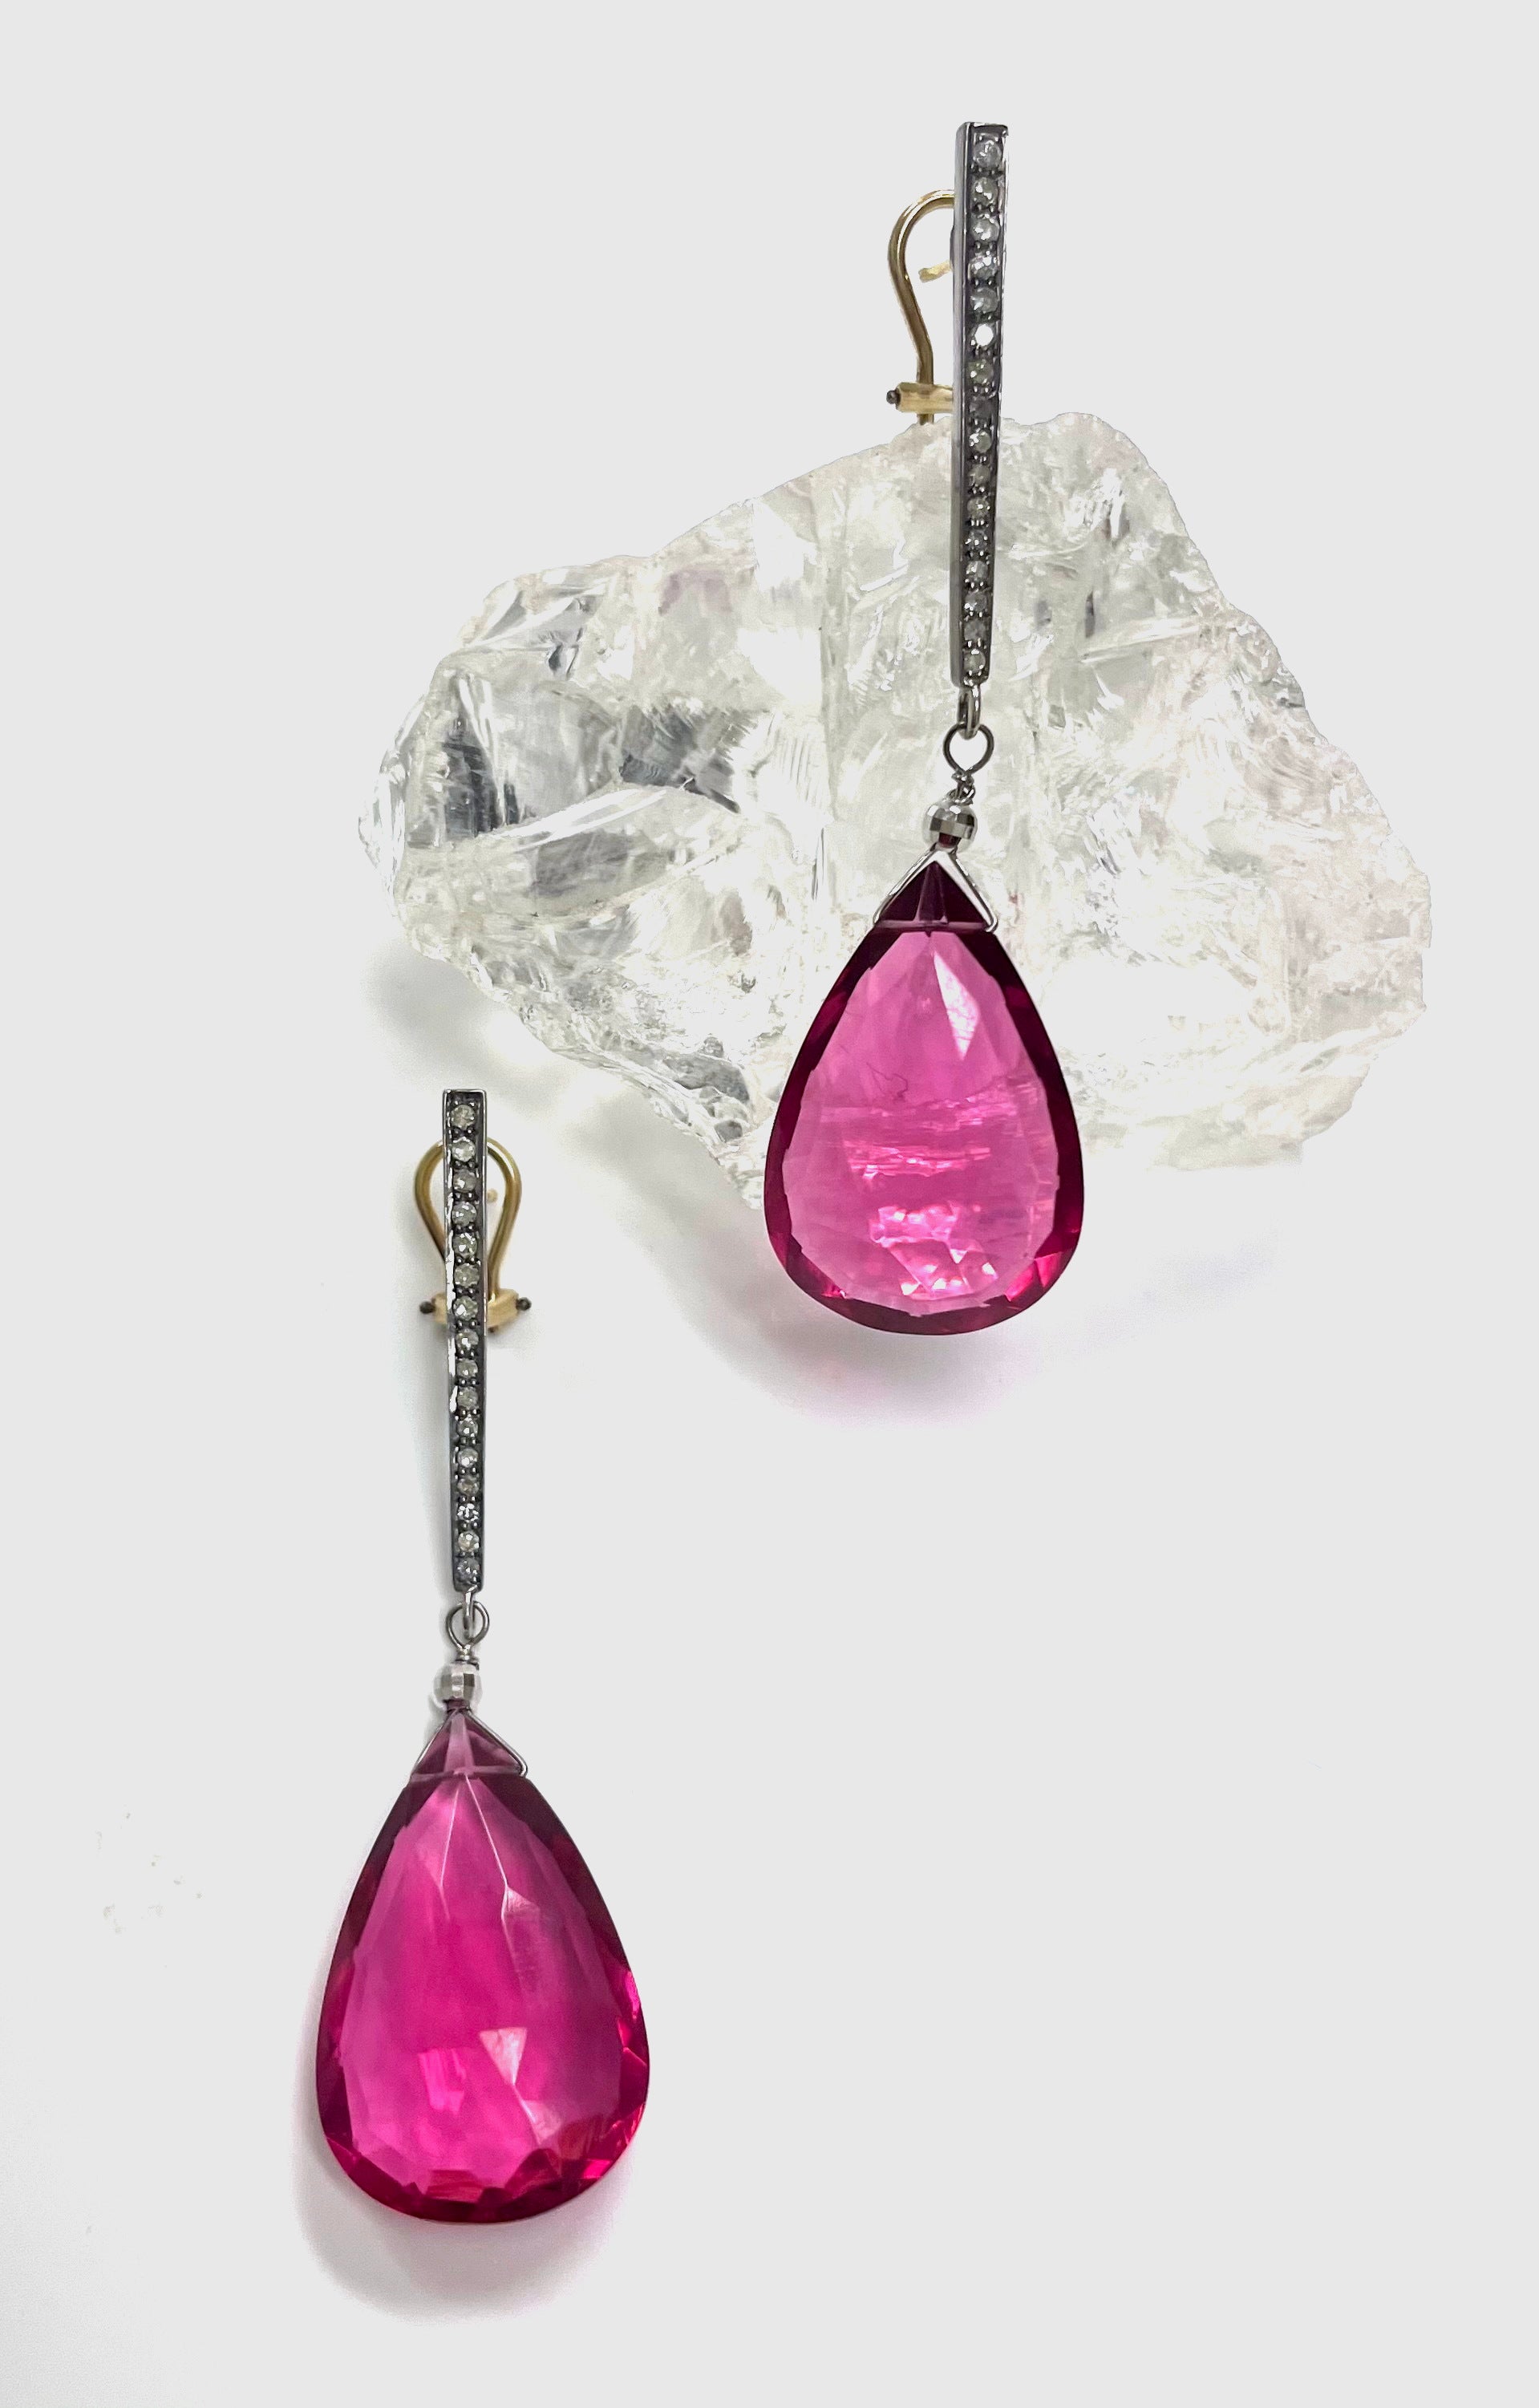 Description
Vibrant hot pink faceted Hydro Quartz pear shape drops suspended from pave diamond bar earrings.
Item # E3252

Materials and Weight
Quartz, 45 carats, 26 x 17mm, faceted pear shape
Pave diamonds with 14k gold posts and omega backs
14k